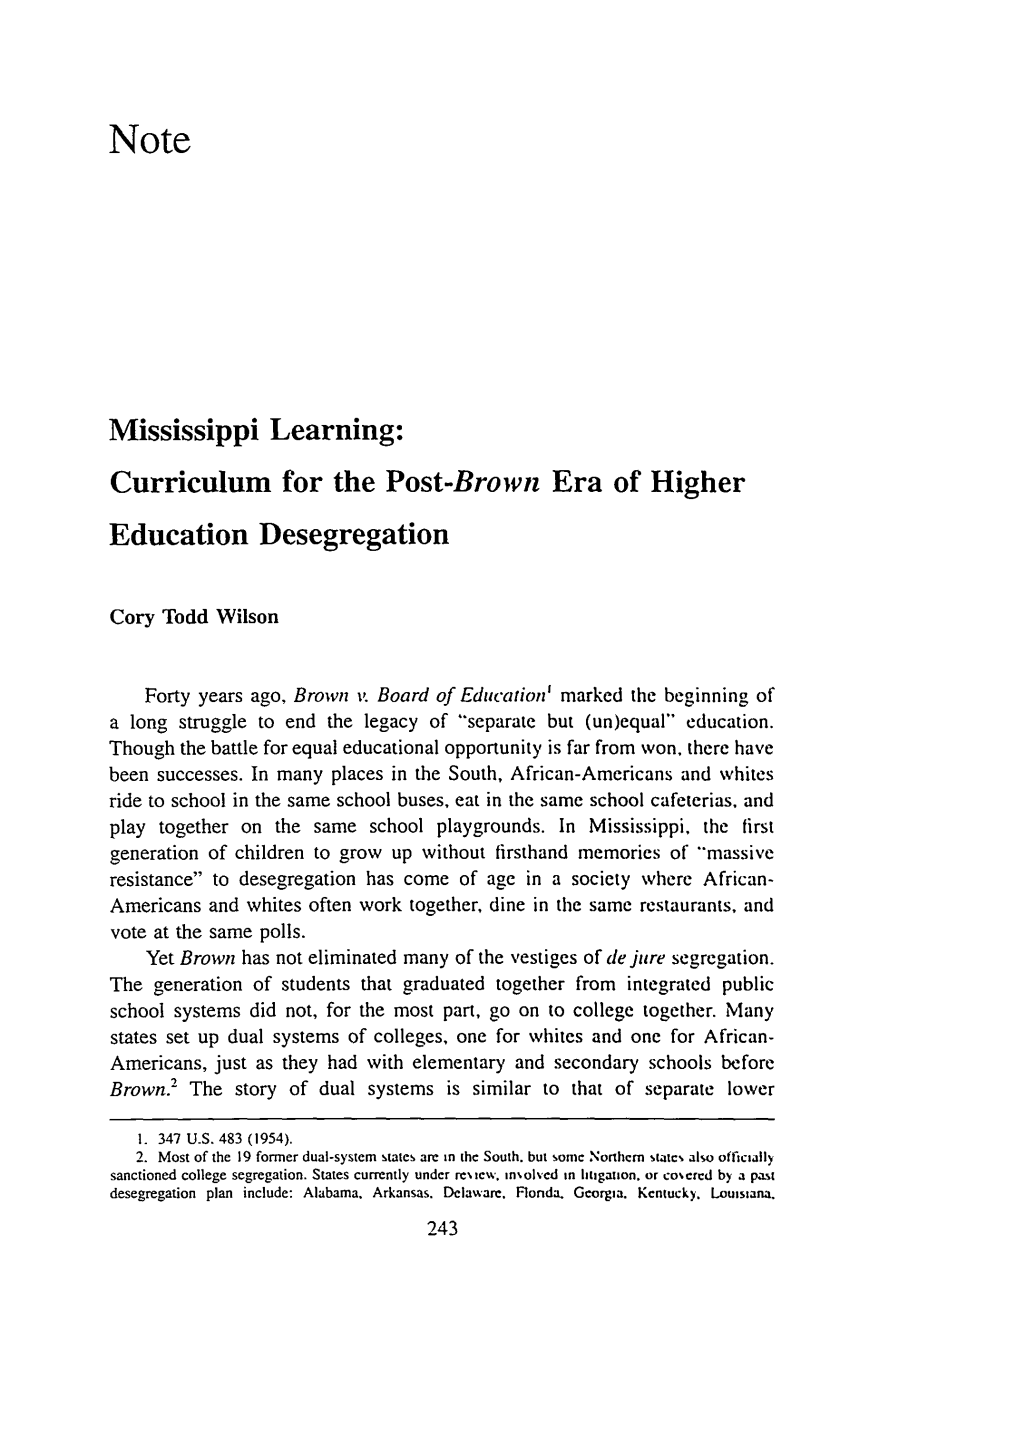 Curriculum for the Post-Brown Era of Higher Education Desegregation